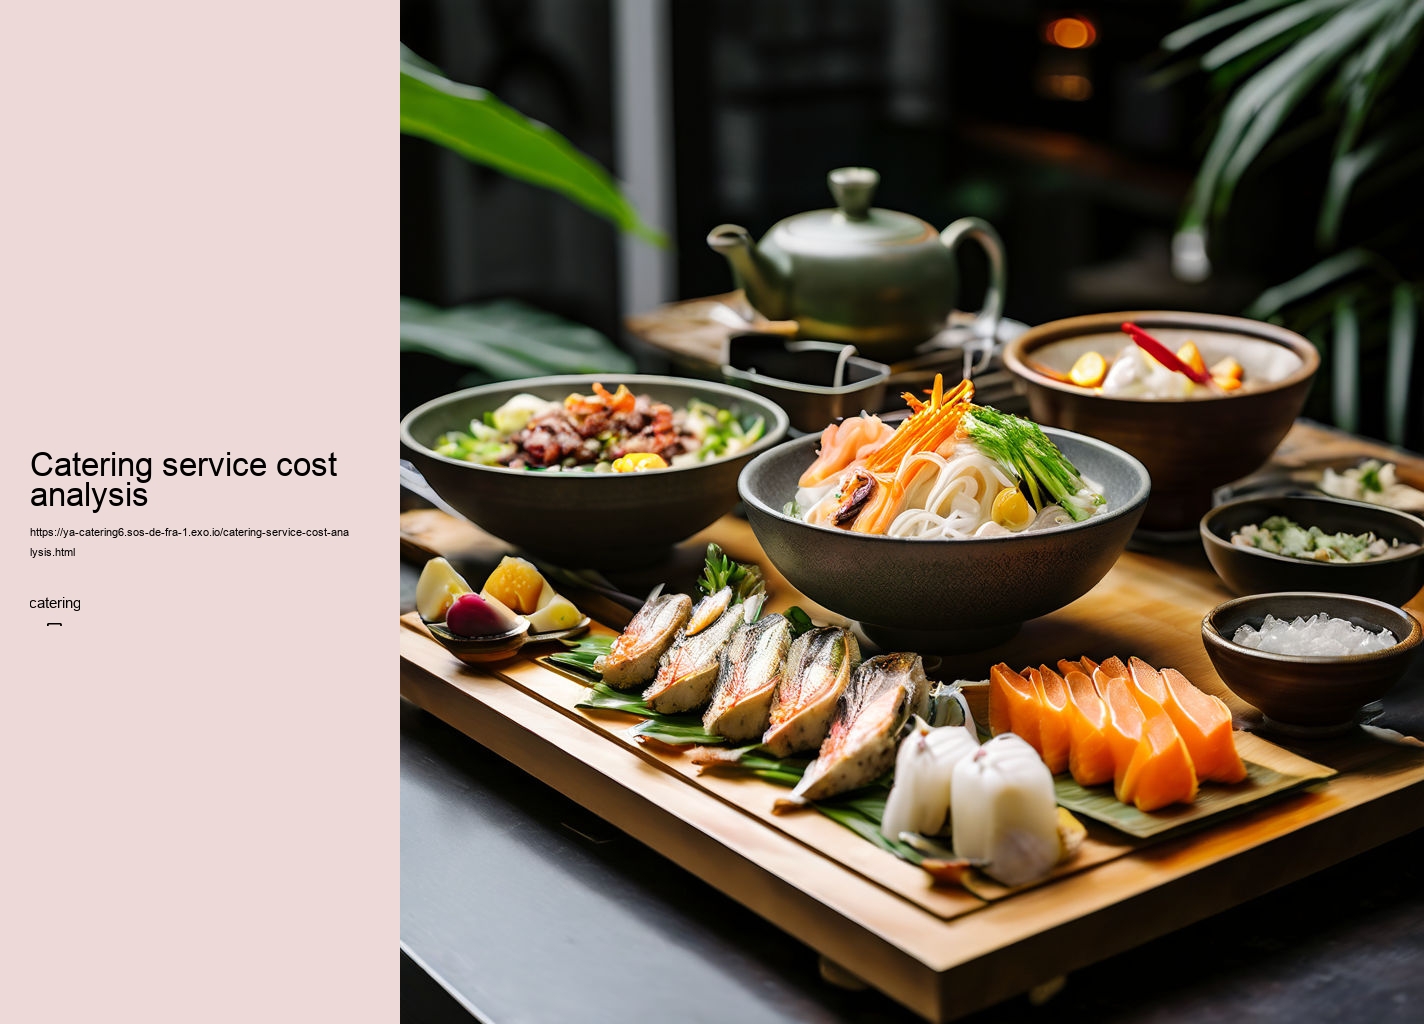 Catering service cost analysis